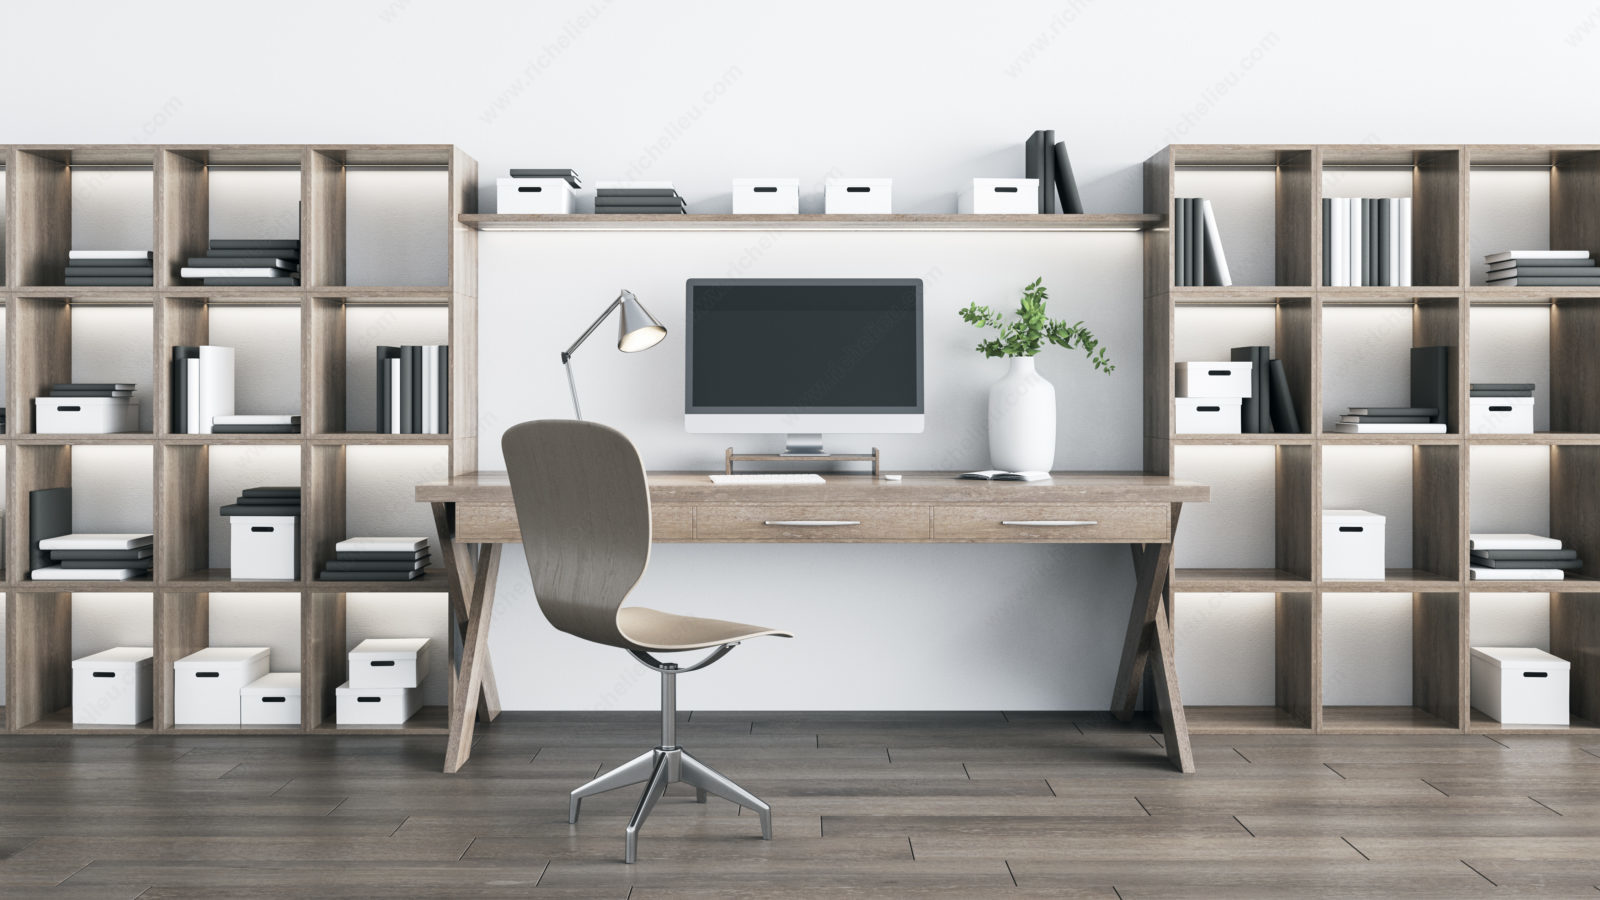 12 Essentials For Designing The Ultimate Home Office Space